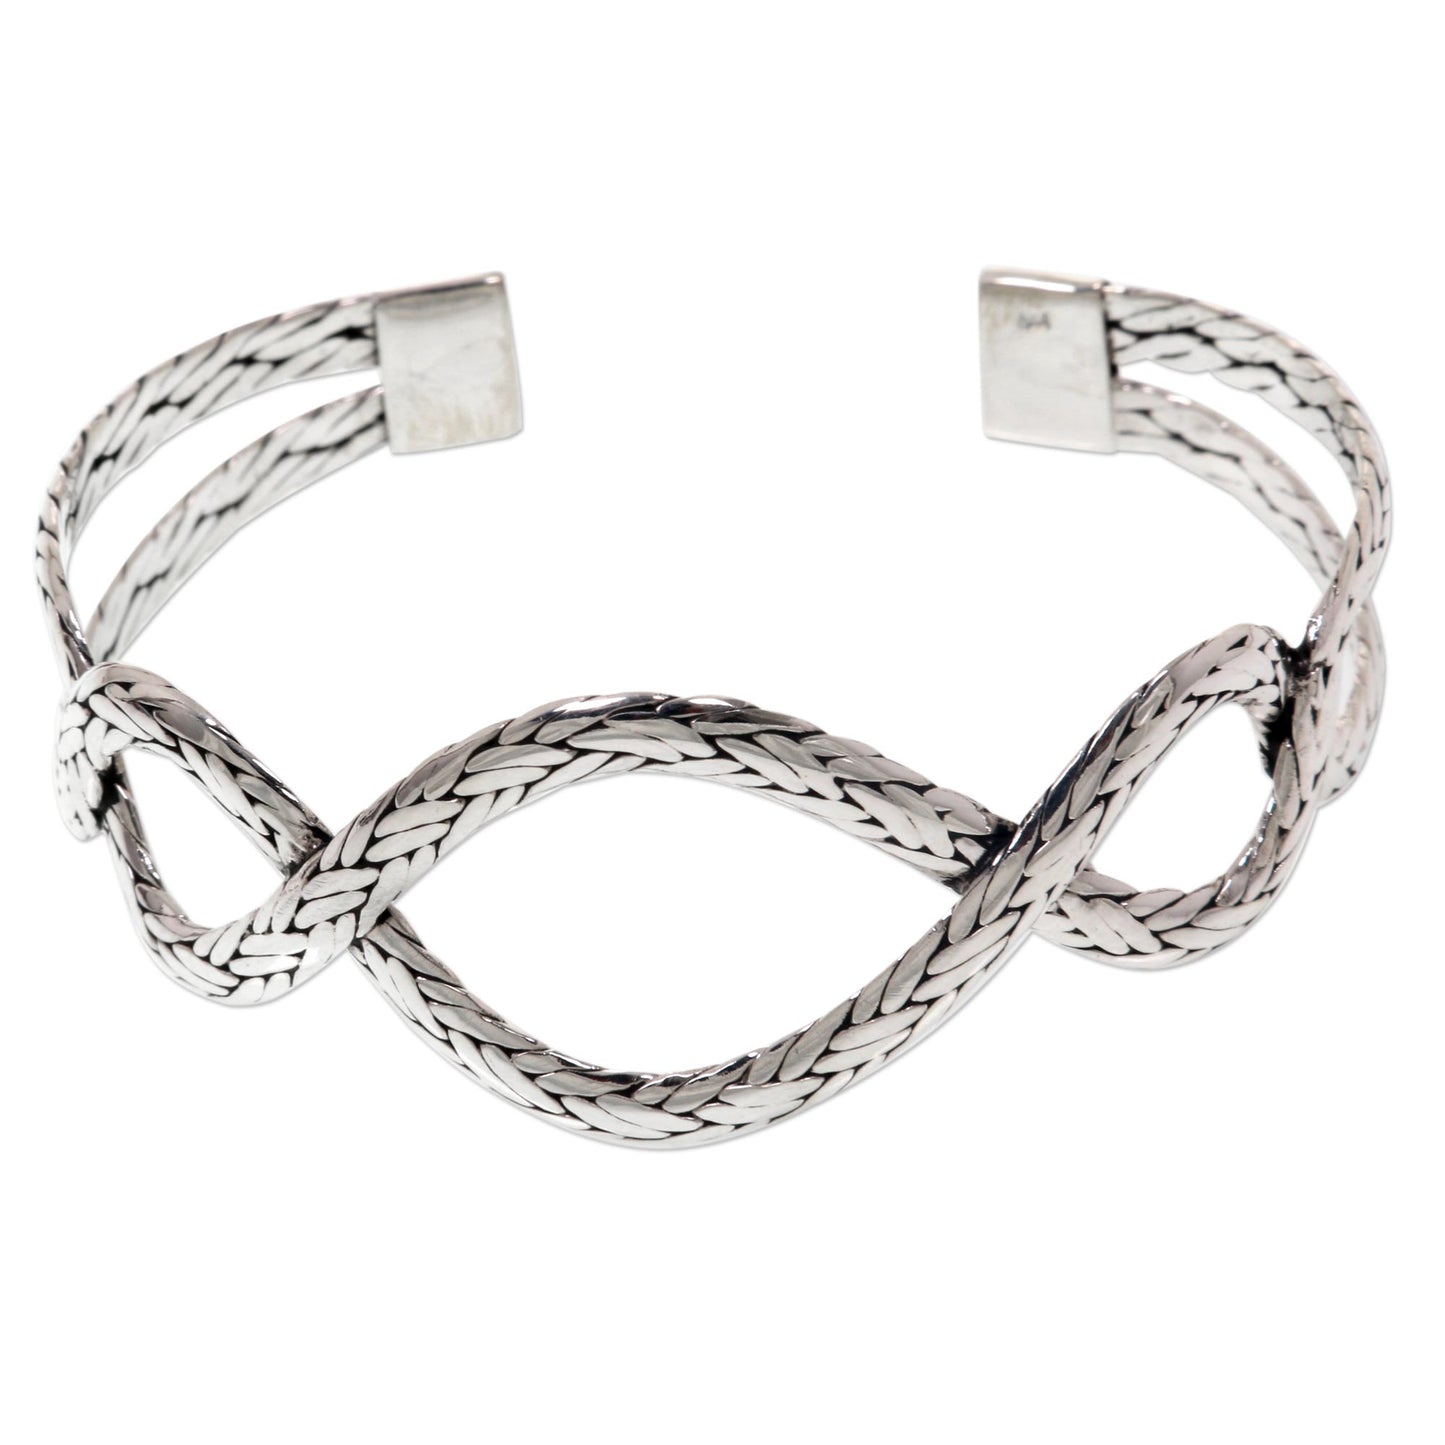 Lariat Women's Silver 925 Hand Made Cuff Bracelet from Bali